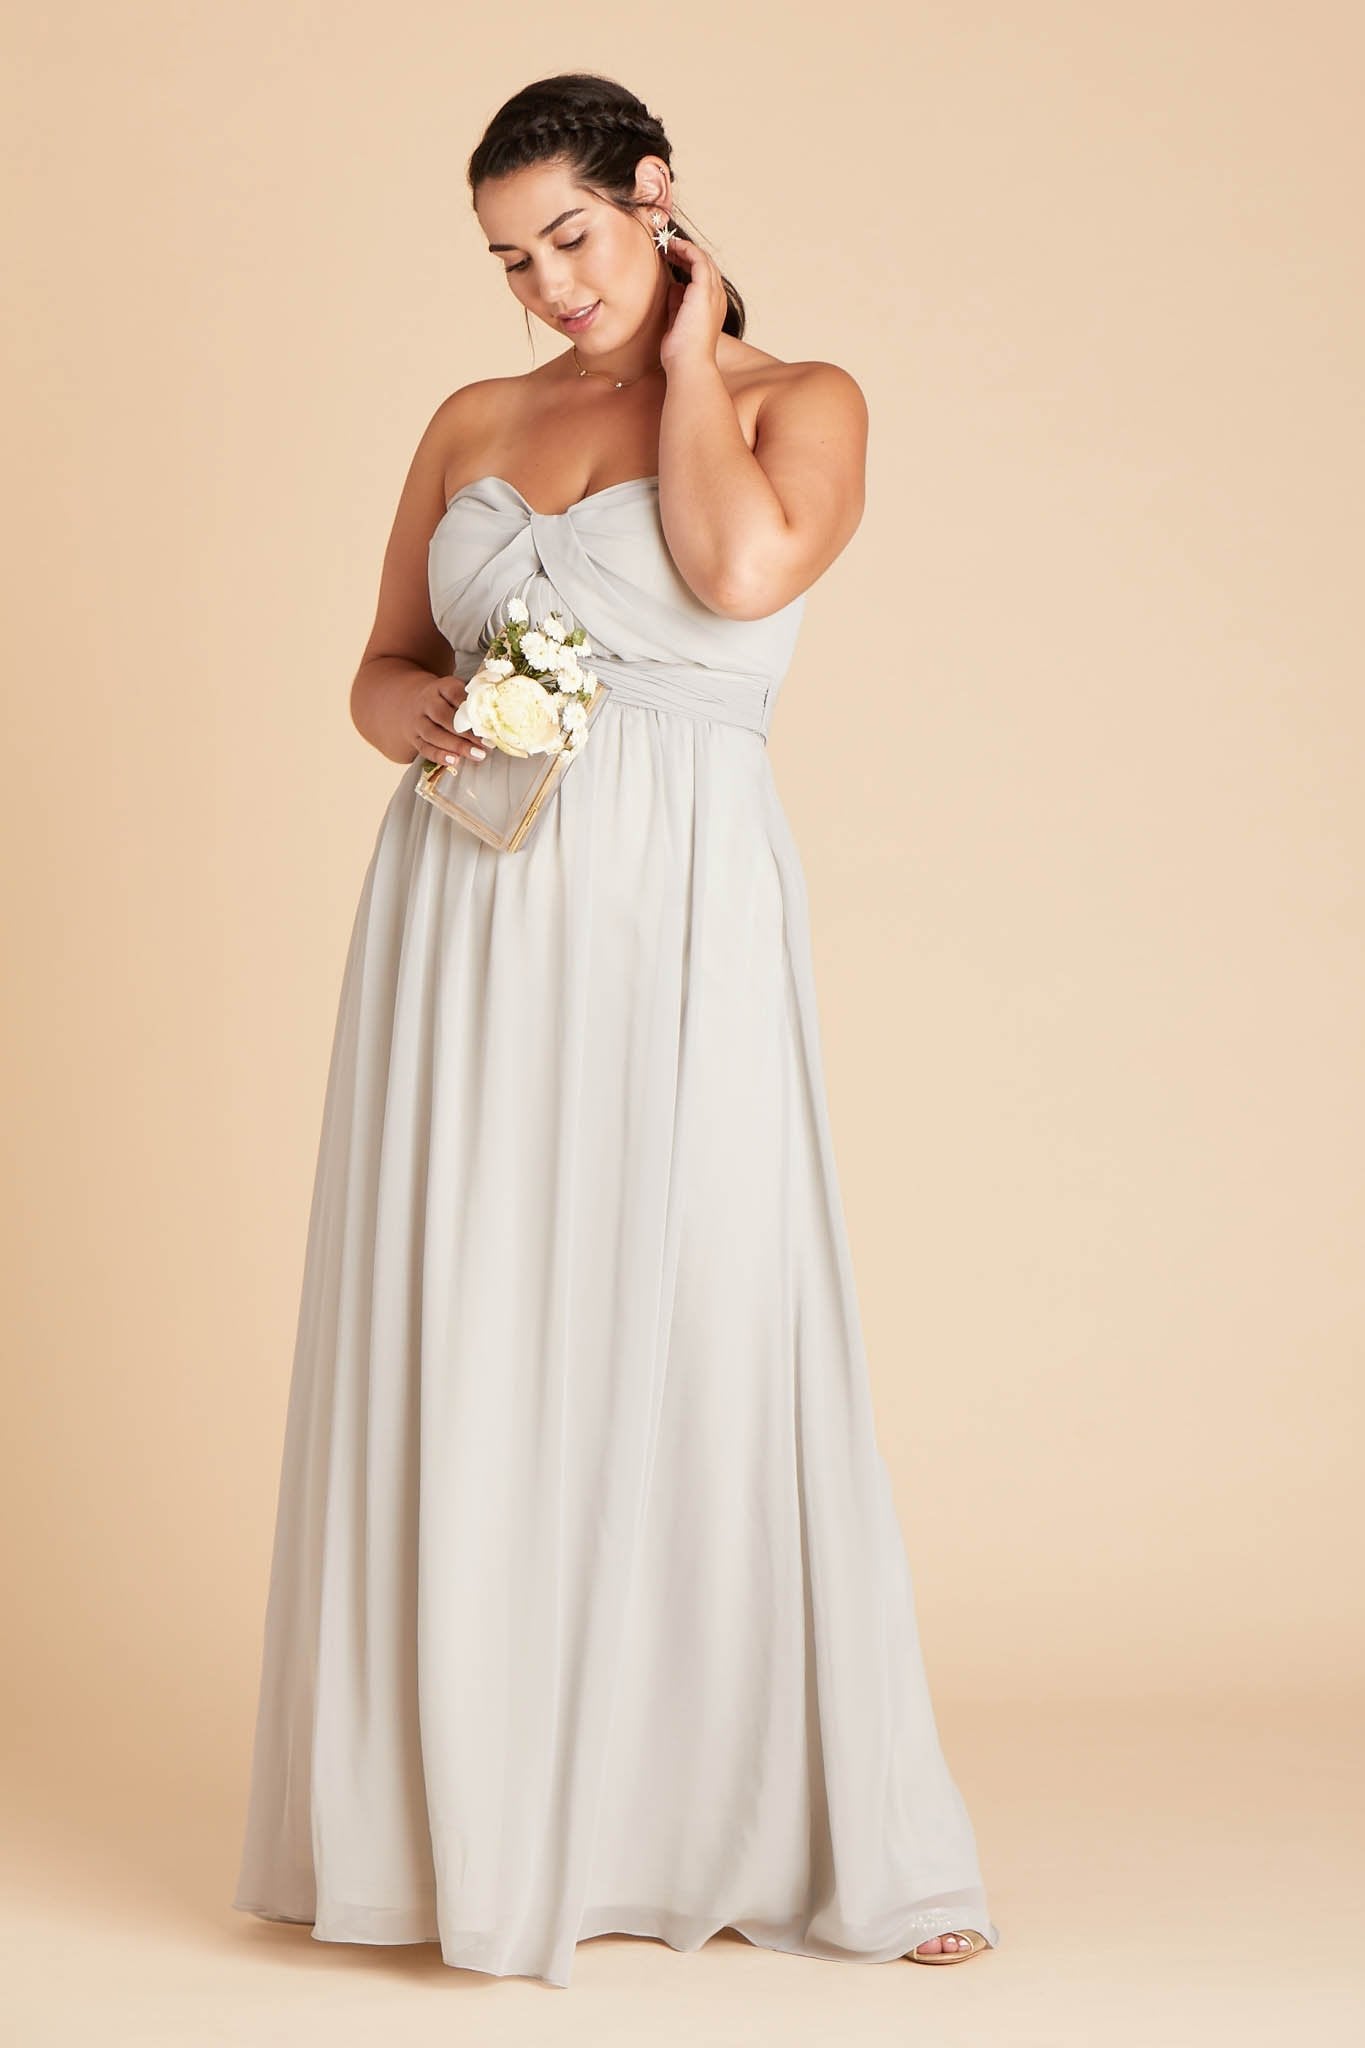 Grace convertible plus size bridesmaid dress in dove gray chiffon by Birdy Grey, front view